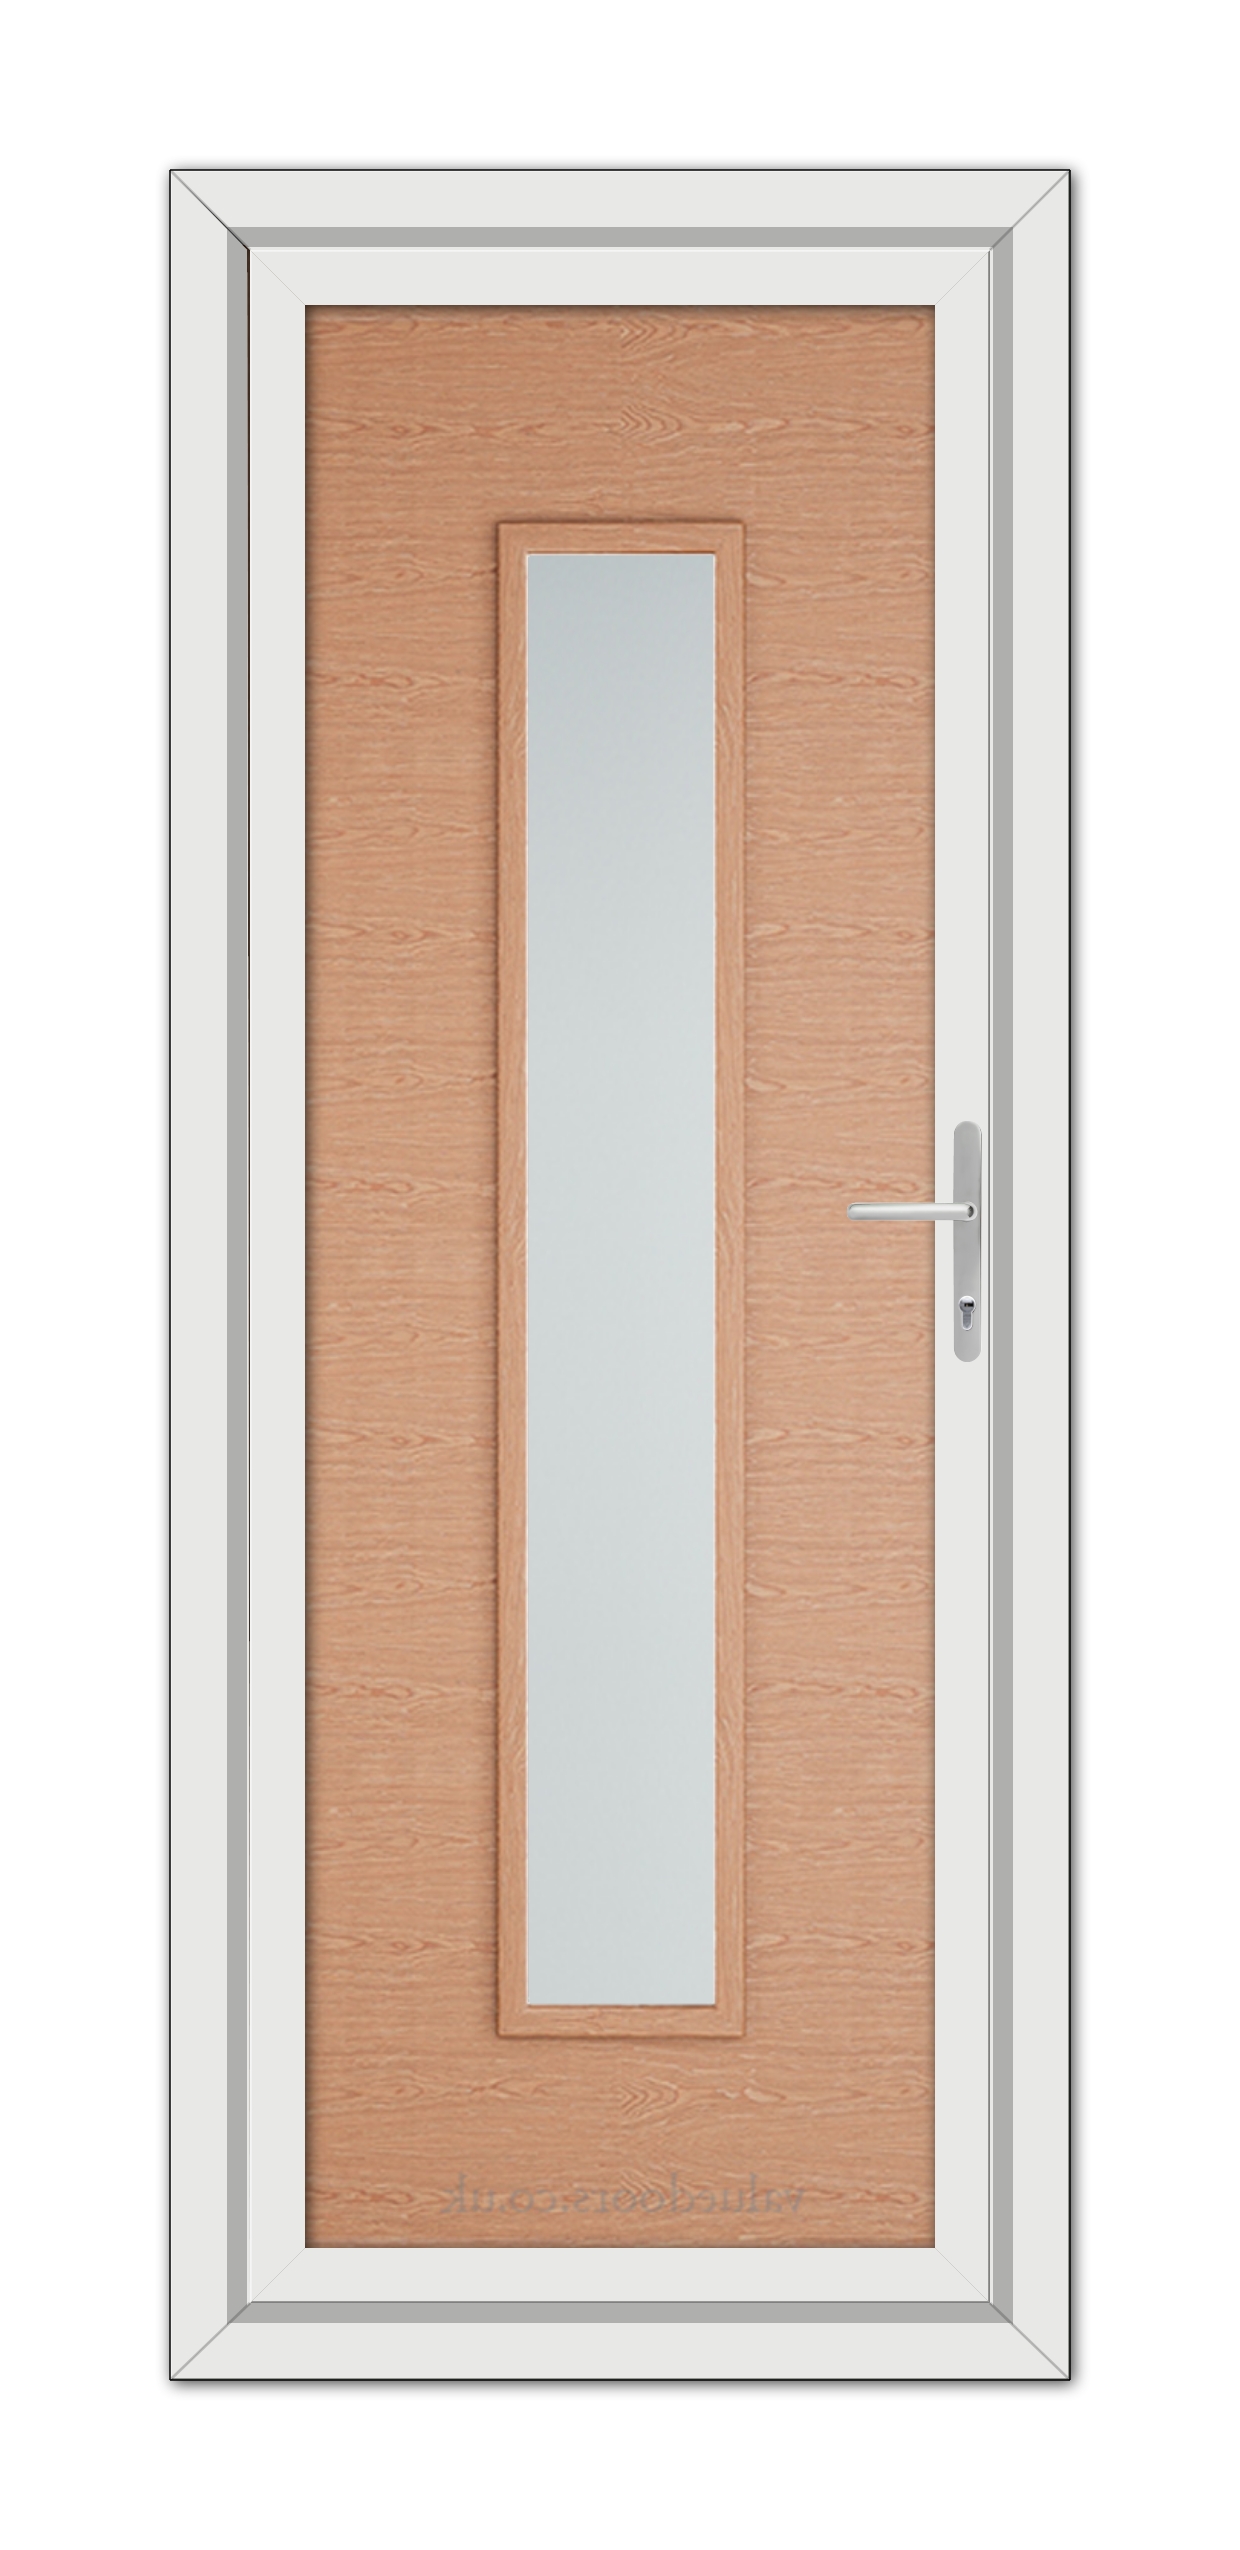 Irish Oak Modern 5101 uPVC Door with a vertical glass pane, framed in white, featuring a metallic handle on the right side.